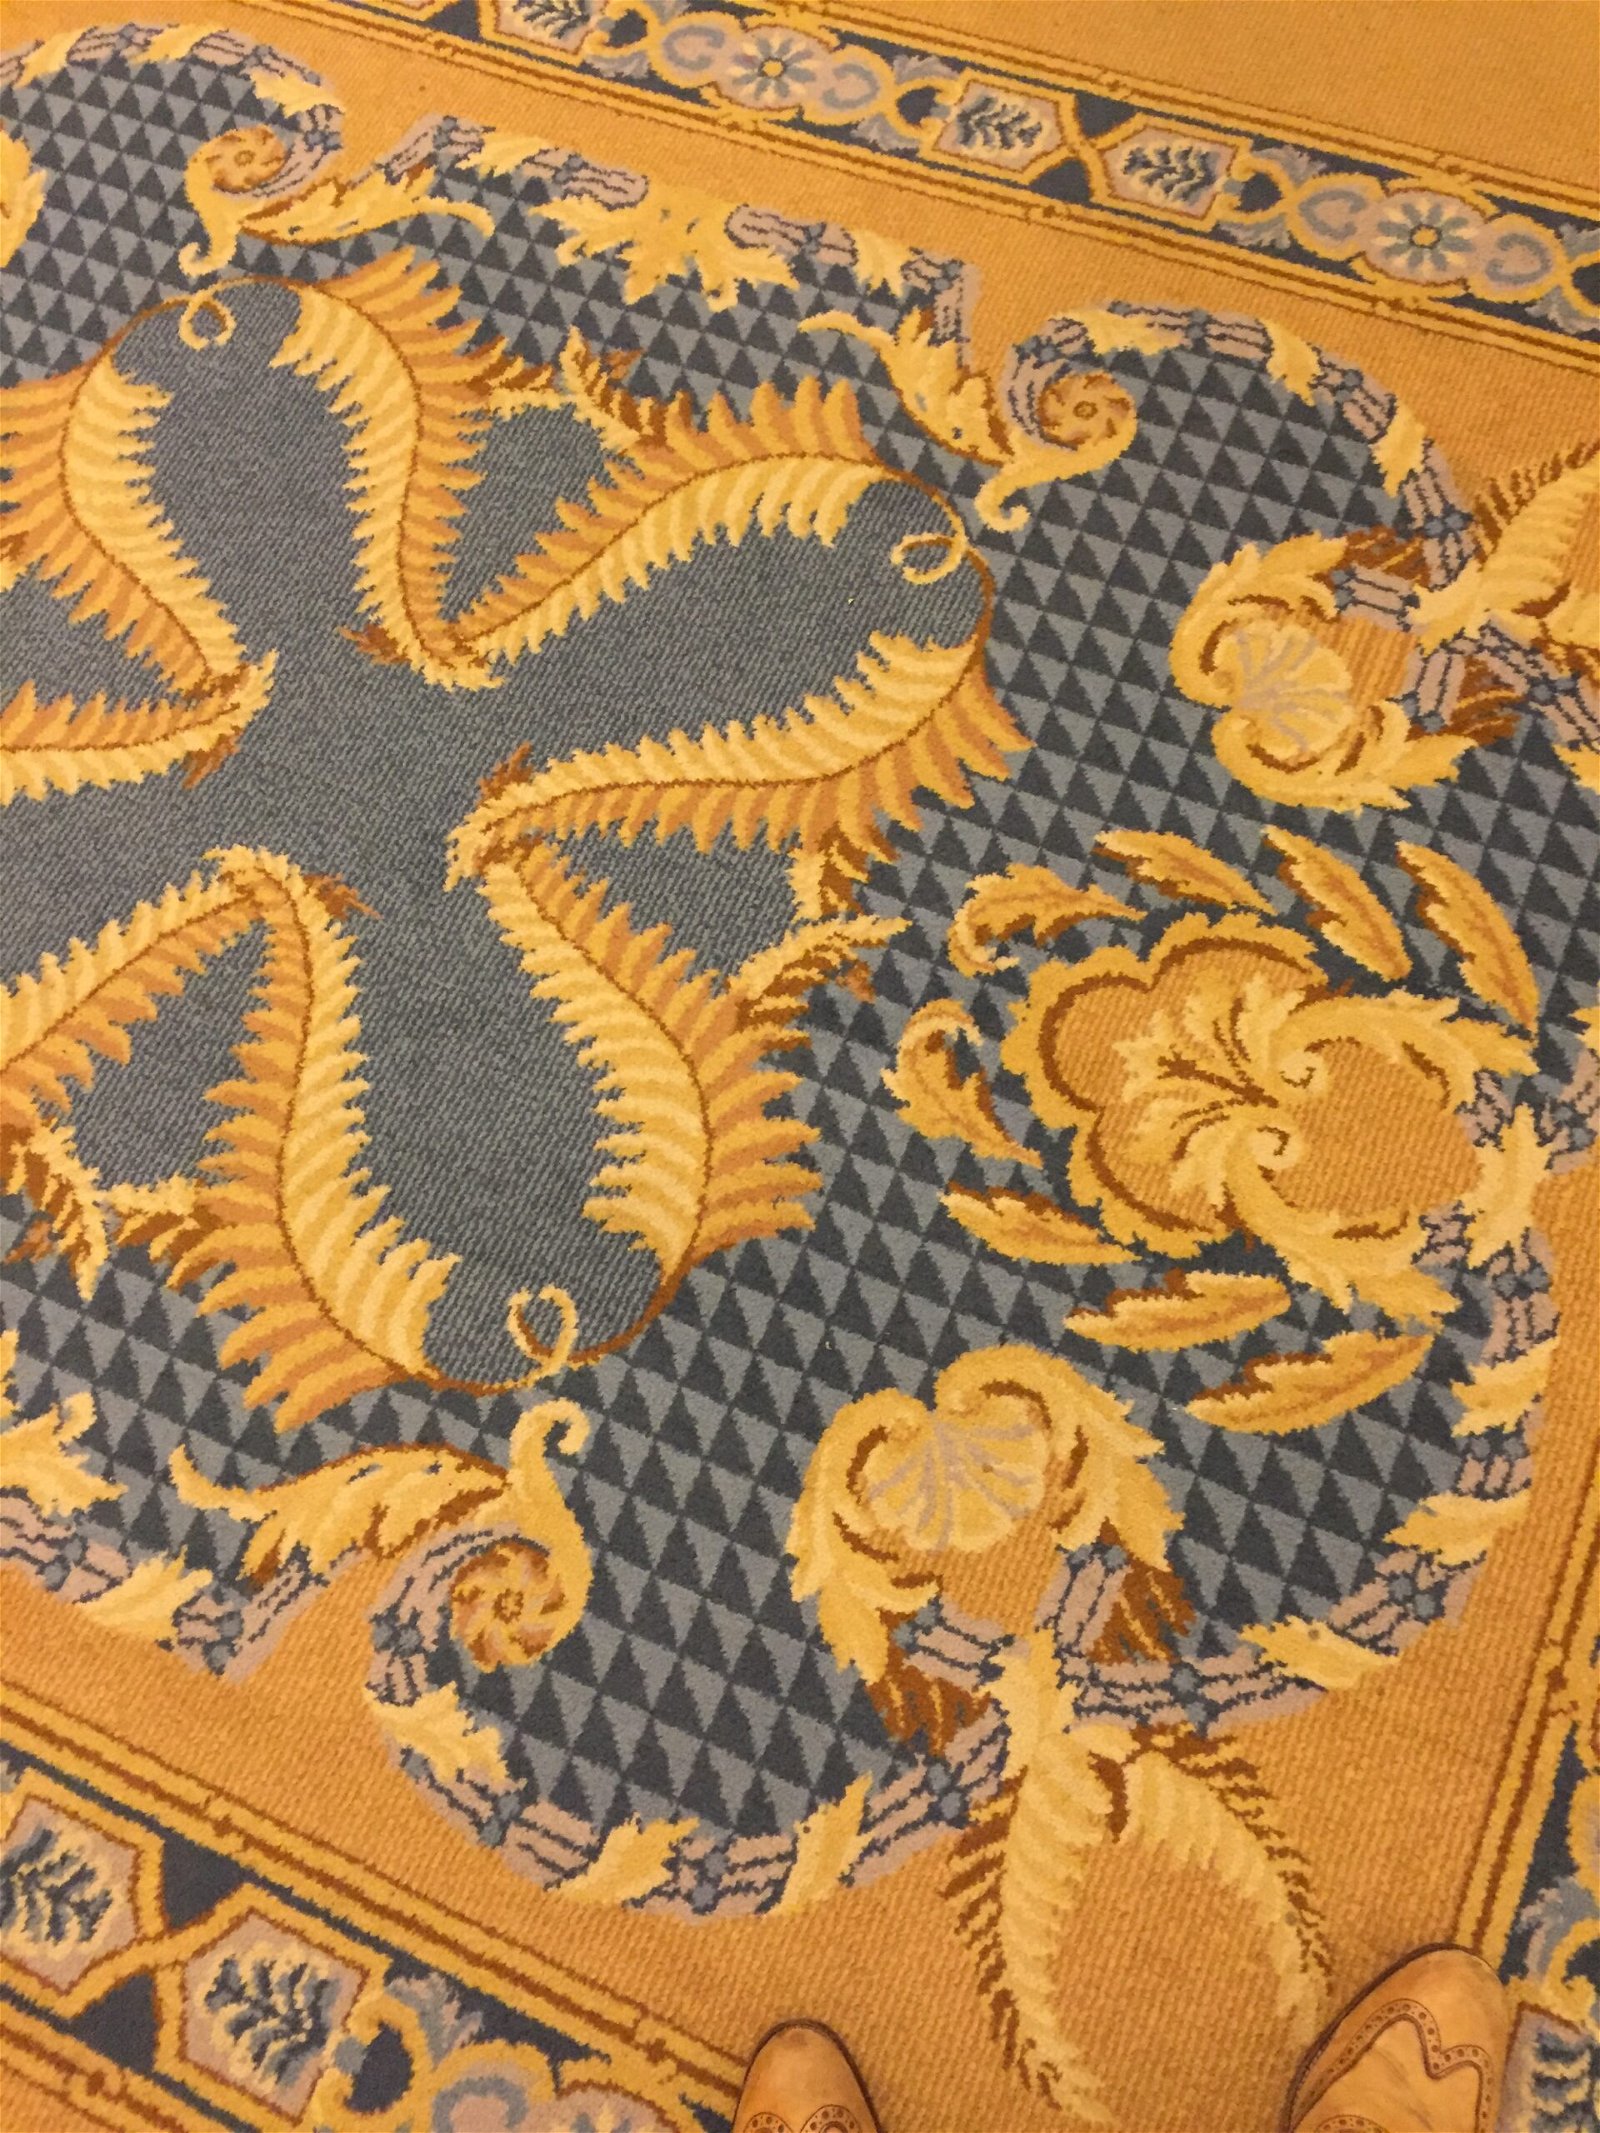 Carpet pattern at the Fairmont Olympic Hotel